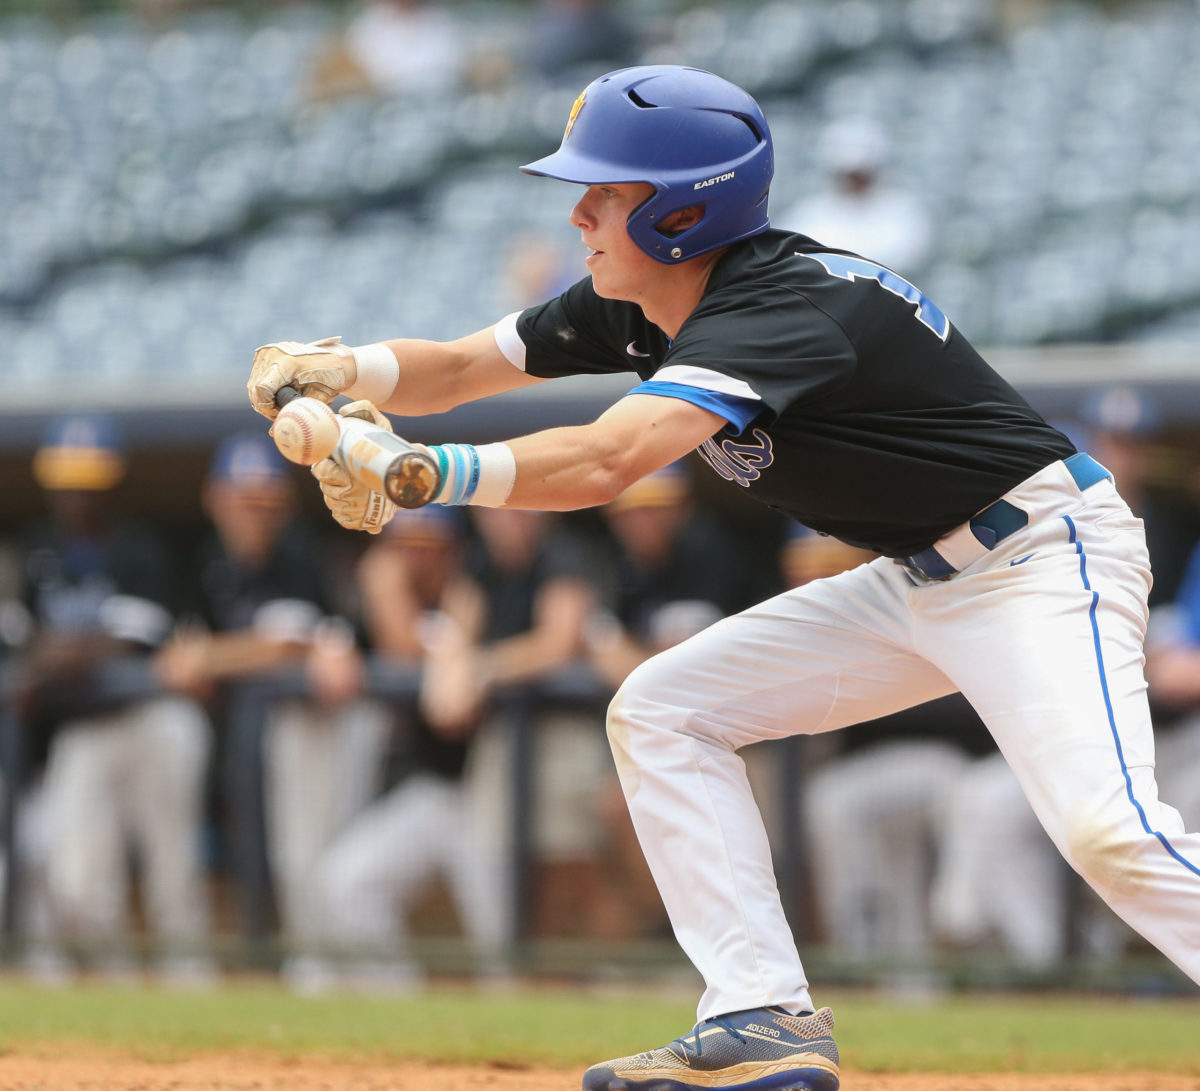 Booneville's Ben Sandlin (15) bunts. Booneville and Magee played in game 3 of the MHSAA Class 3A Baseball Championship on Saturday, June 5, 2021 at Trustmark Park. Photo by Keith Warren